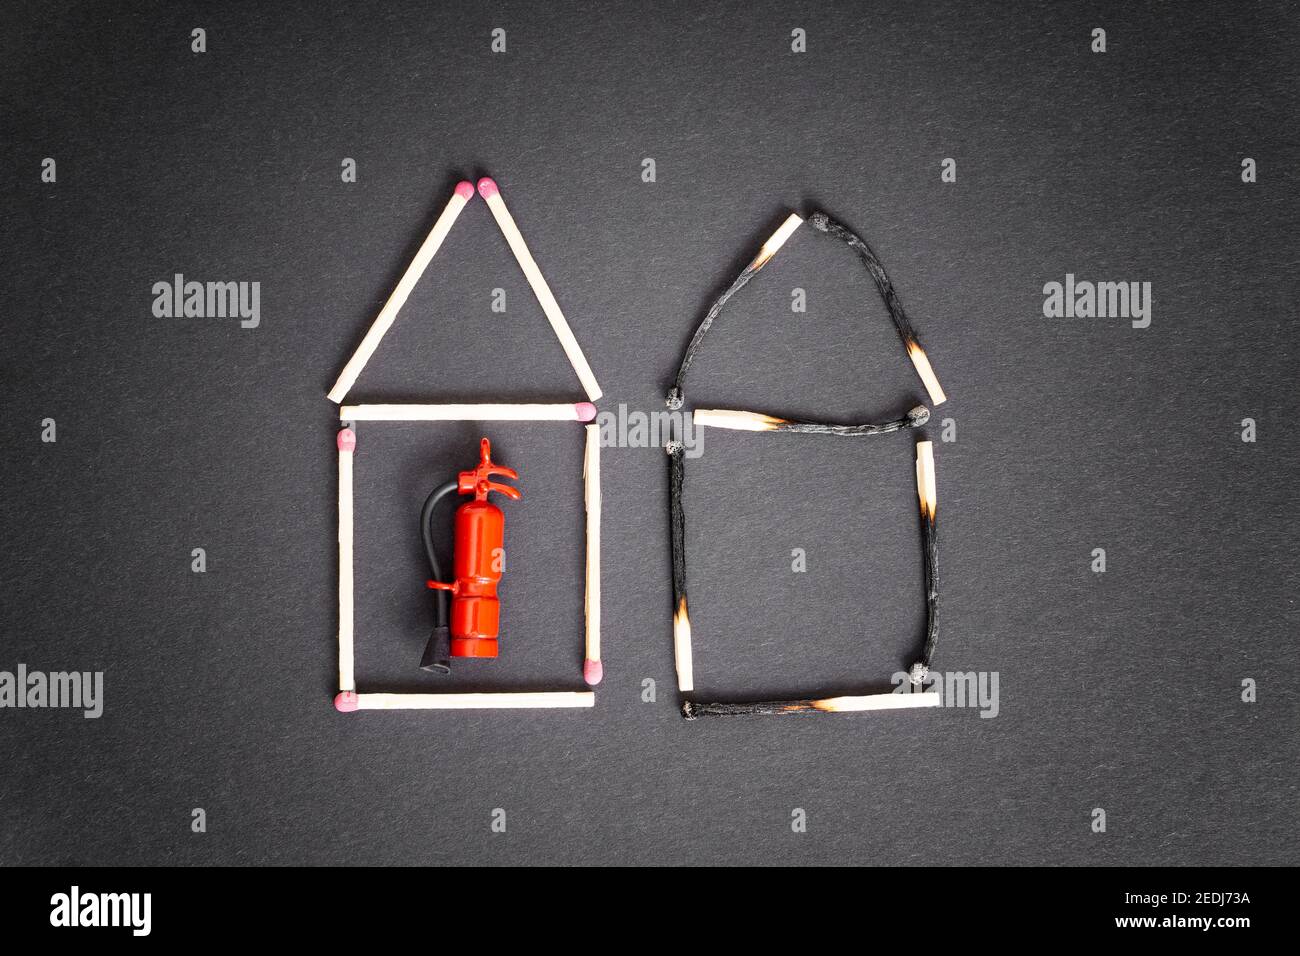 Two houses made of burnt and unburnt matches with a miniature fire extinguisher inside the undamaged one. Fire safety measures and insurance concept. Stock Photo